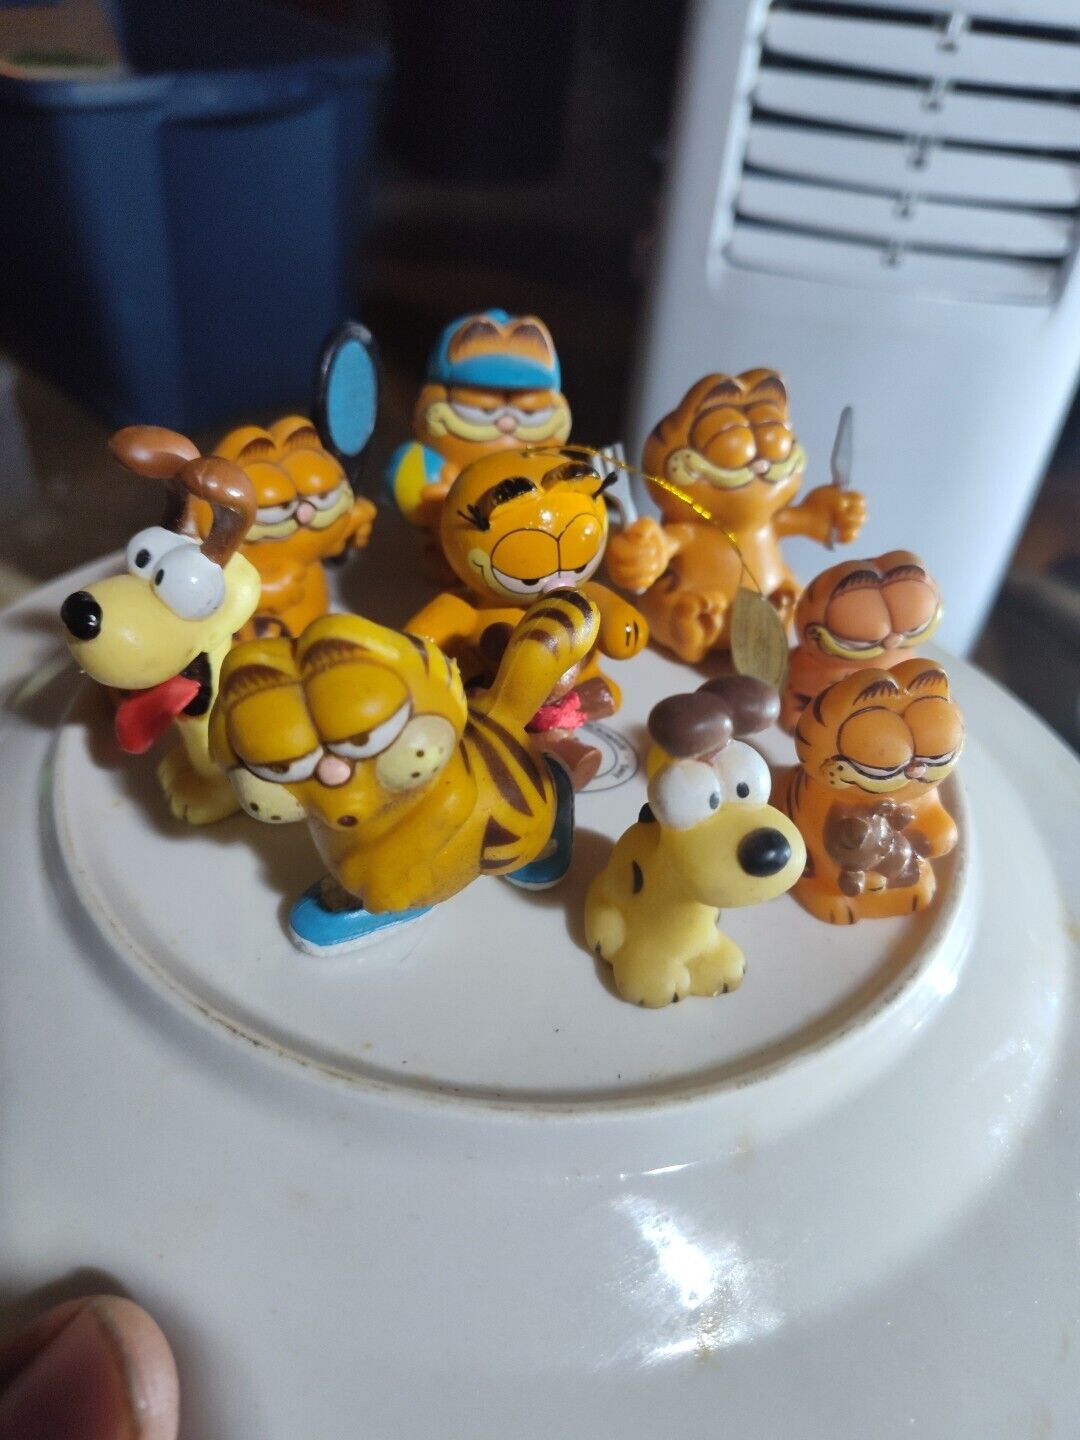 Lot Of 9 Garfield Figurines Including Spoon And Fork,Tennis, Running,...